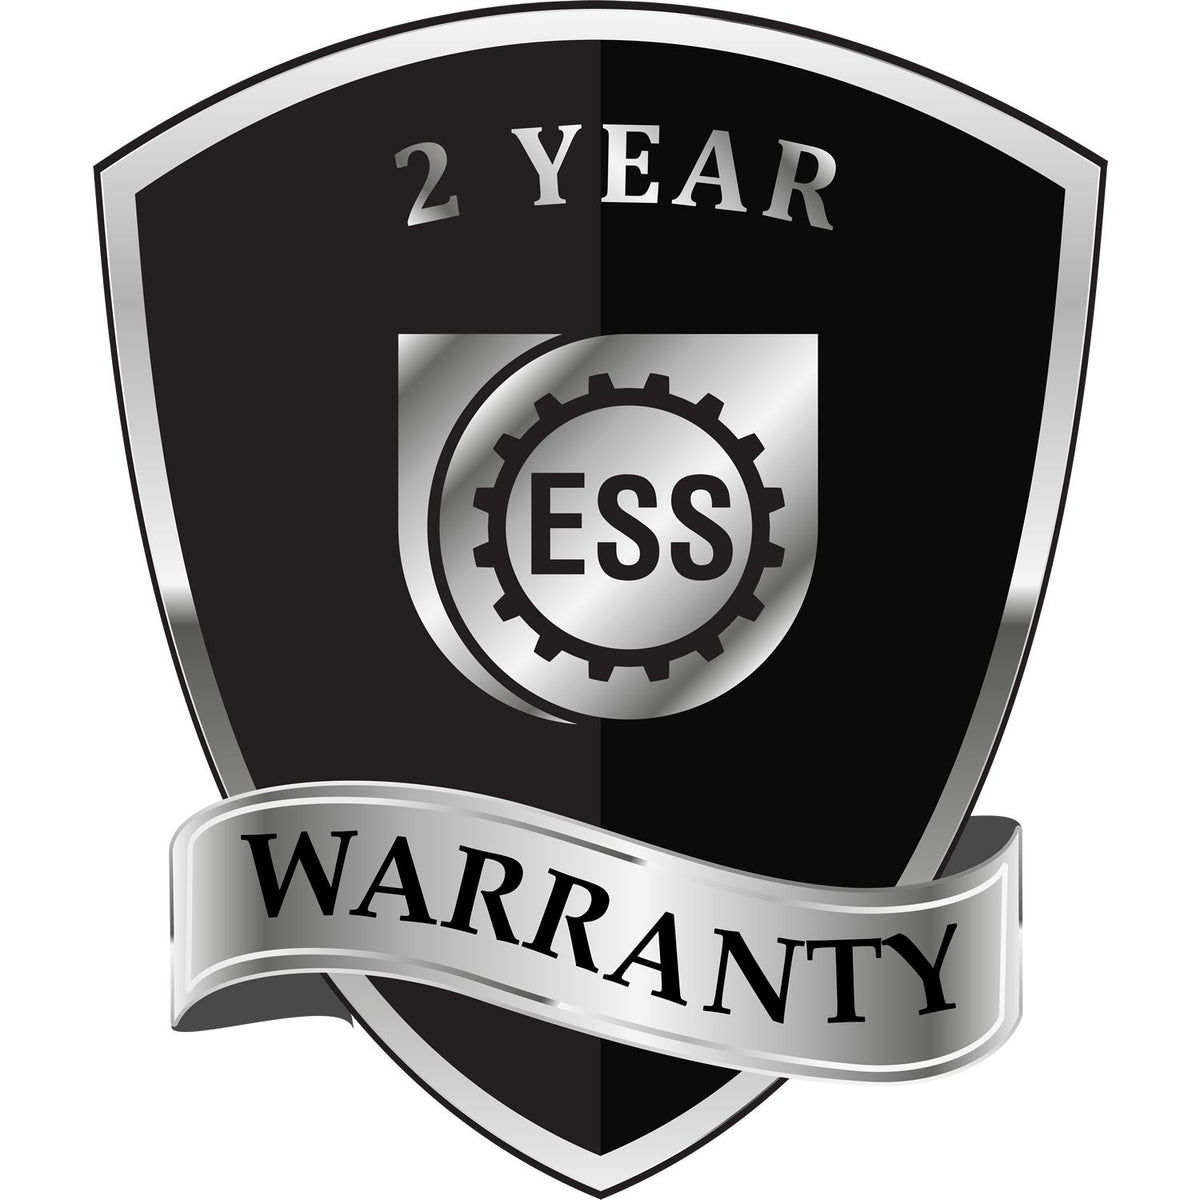 A badge or emblem showing a warranty icon for the Long Reach Massachusetts PE Seal